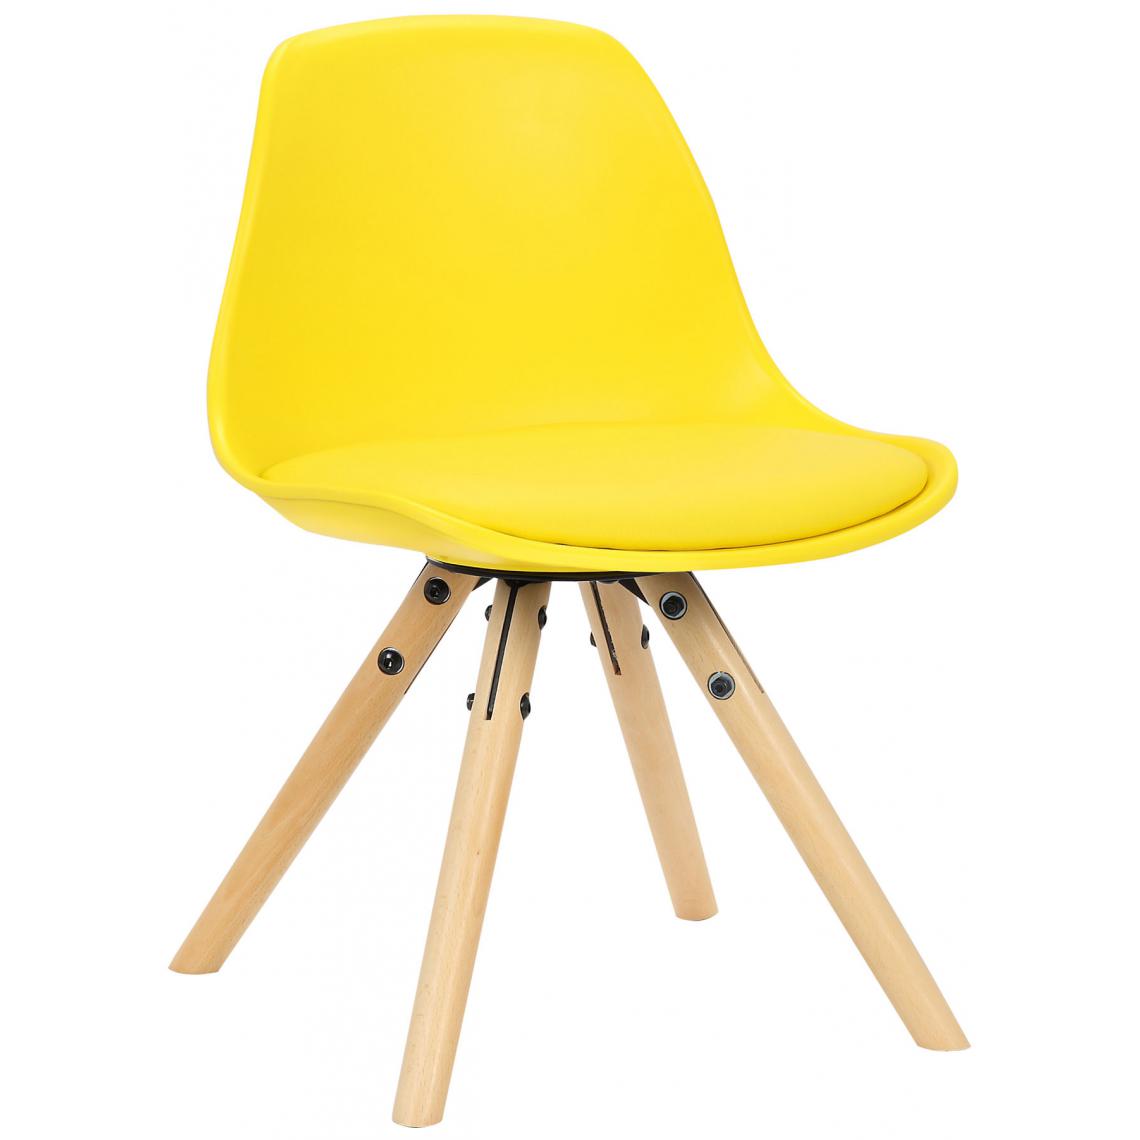 Icaverne - Inedit Chaise haute edition Mbabane couleur Jaune - Chaises